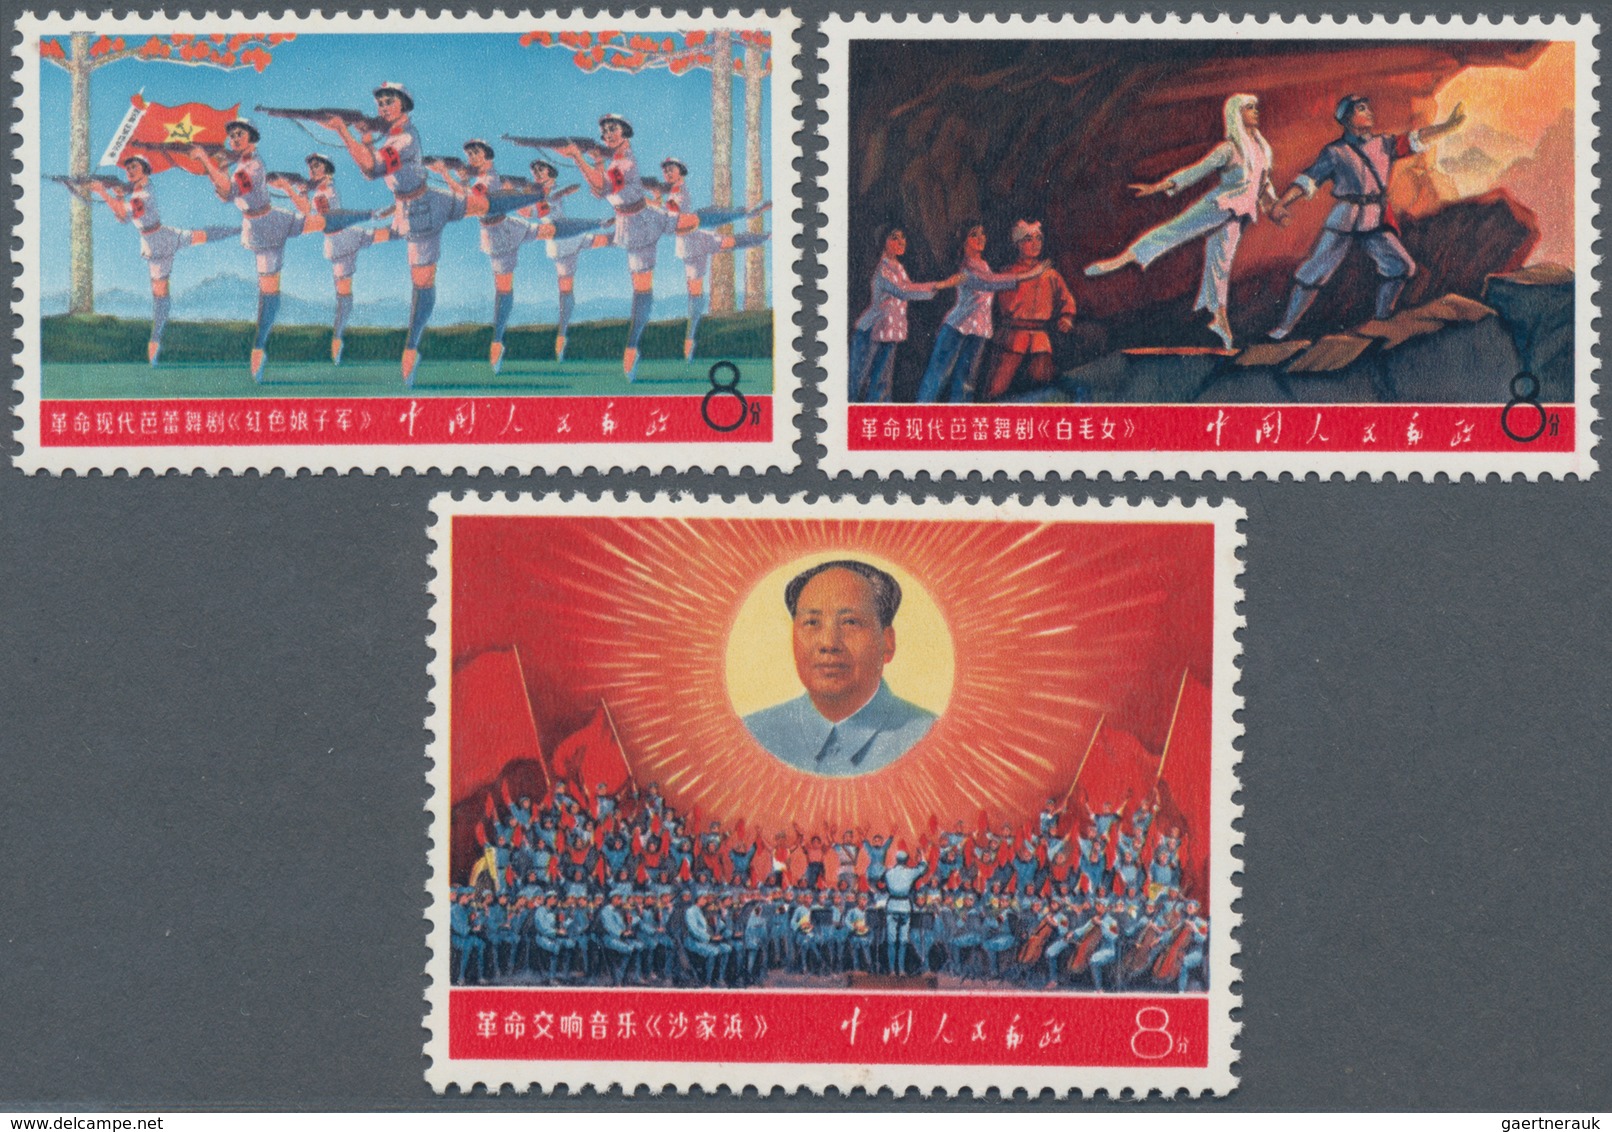 China - Volksrepublik: 1968, Mao's Way In Poetry/Art (W5) MNH. Michel Cat.value 1.900,- €. - Lettres & Documents